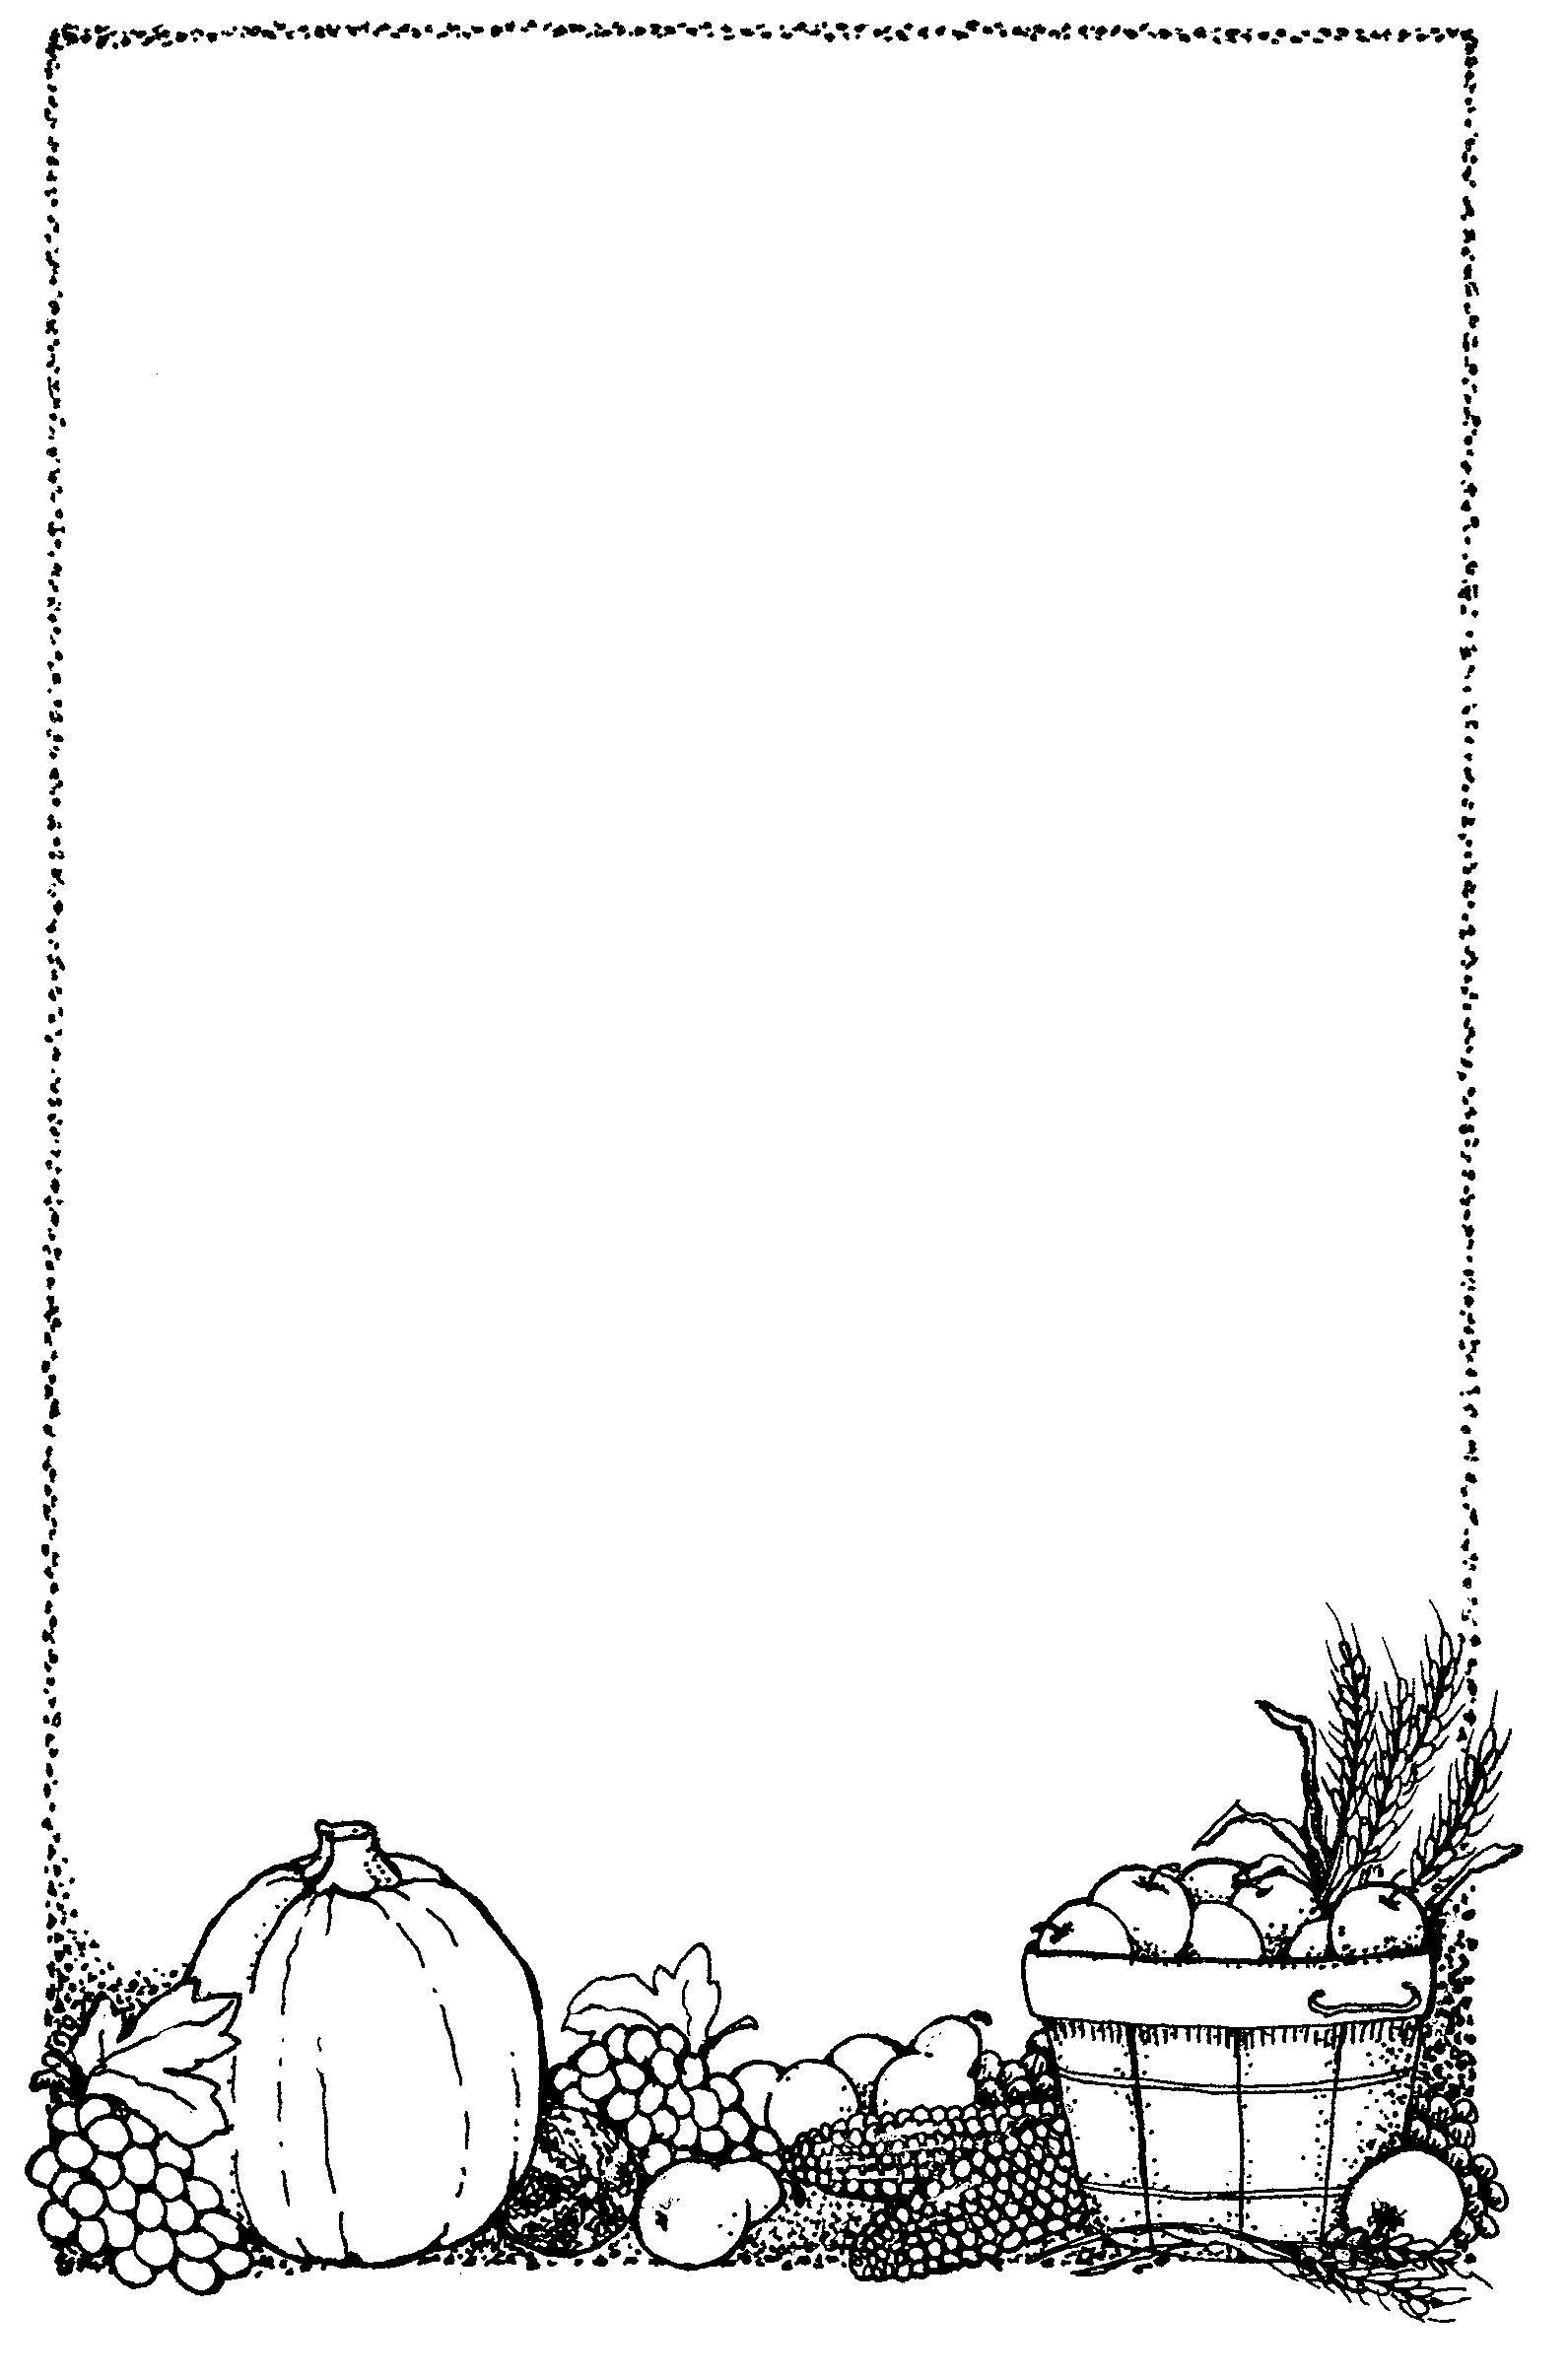 free-thanksgiving-border-clipart-black-and-white-download-free